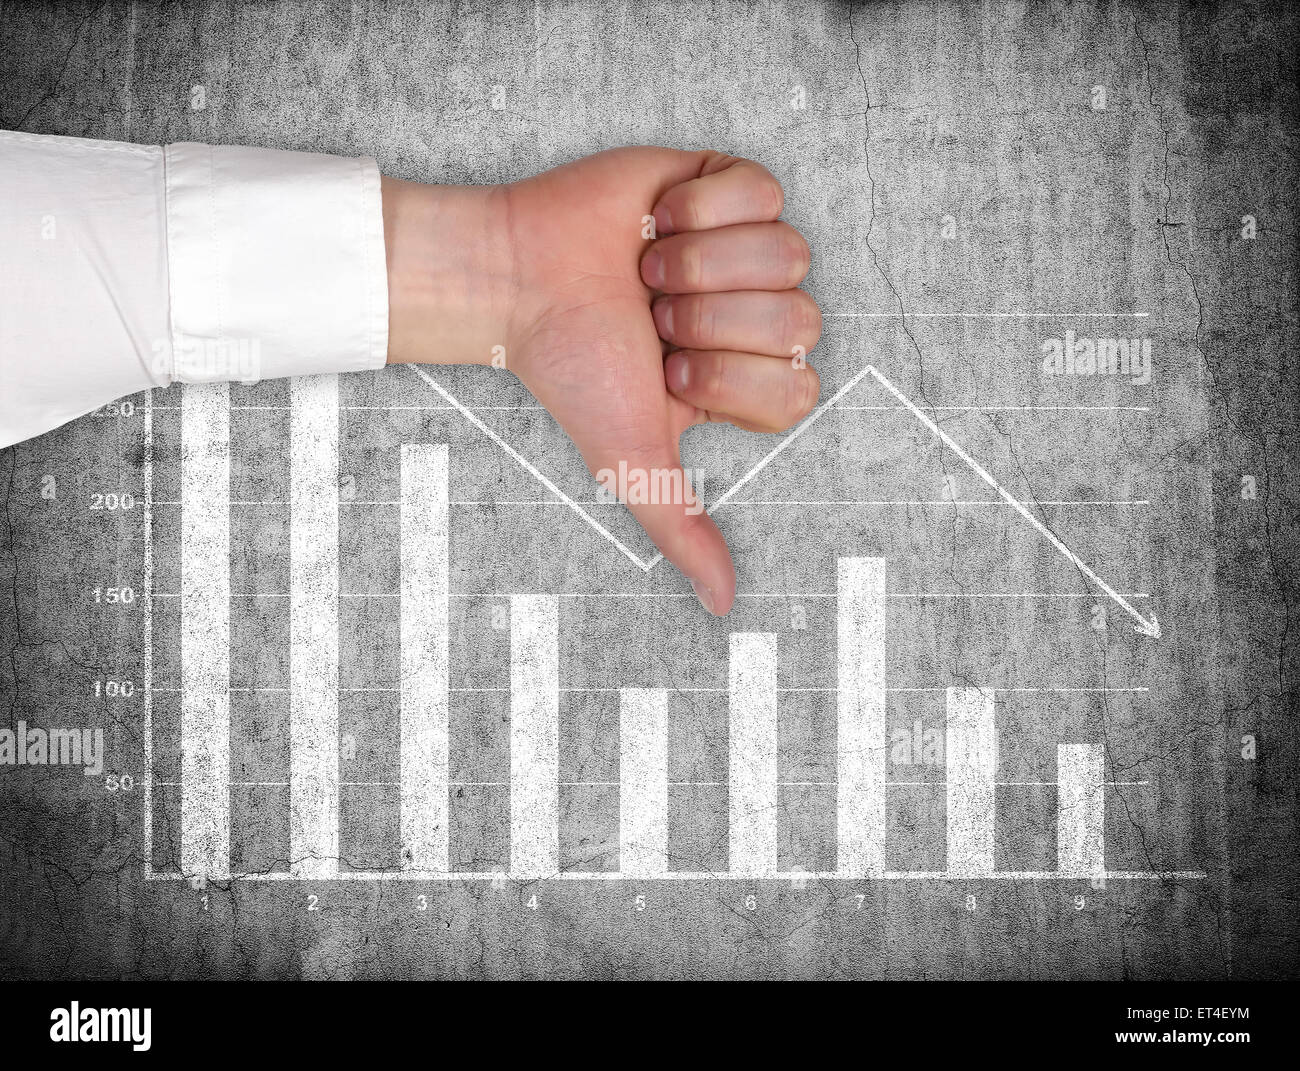 hand showing thumb down  and drawing falling chart on wall Stock Photo